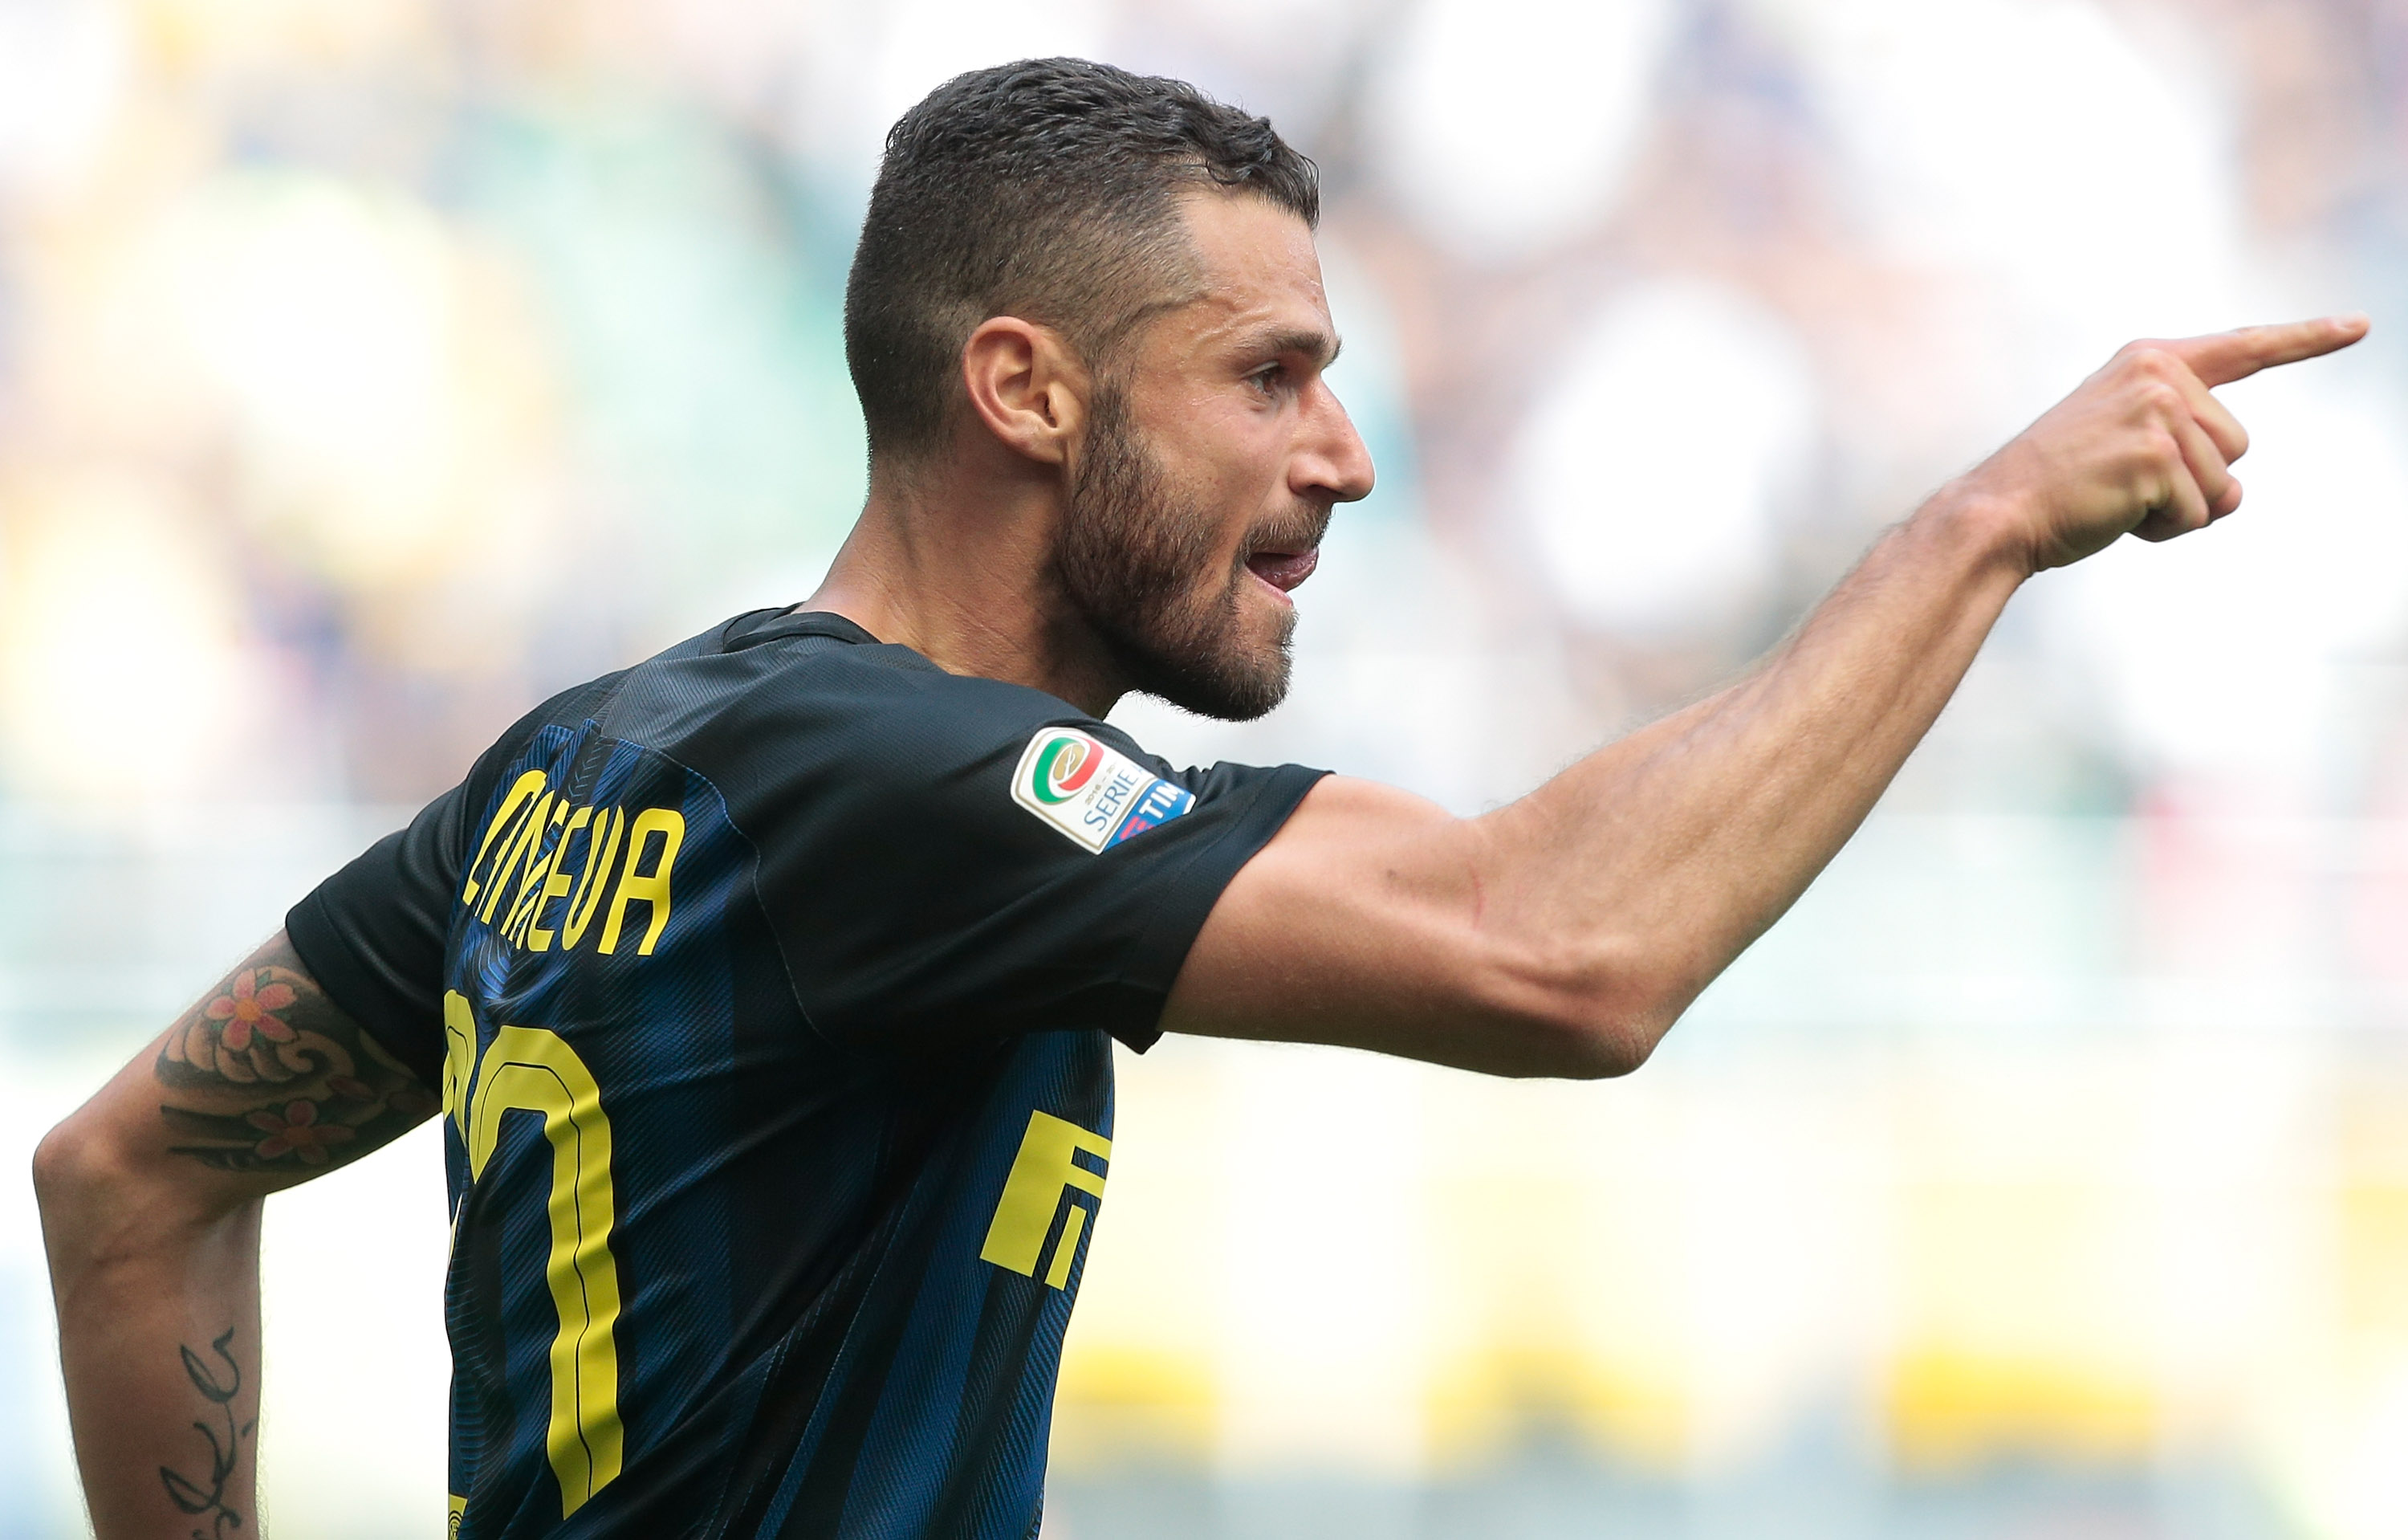 MILAN, ITALY - APRIL 15:  Antonio Candreva of FC Internazionale Milano celebrates after scoring the opening goal during the Serie A match between FC Internazionale and AC Milan at Stadio Giuseppe Meazza on April 15, 2017 in Milan, Italy.  (Photo by Emilio Andreoli/Getty Images )